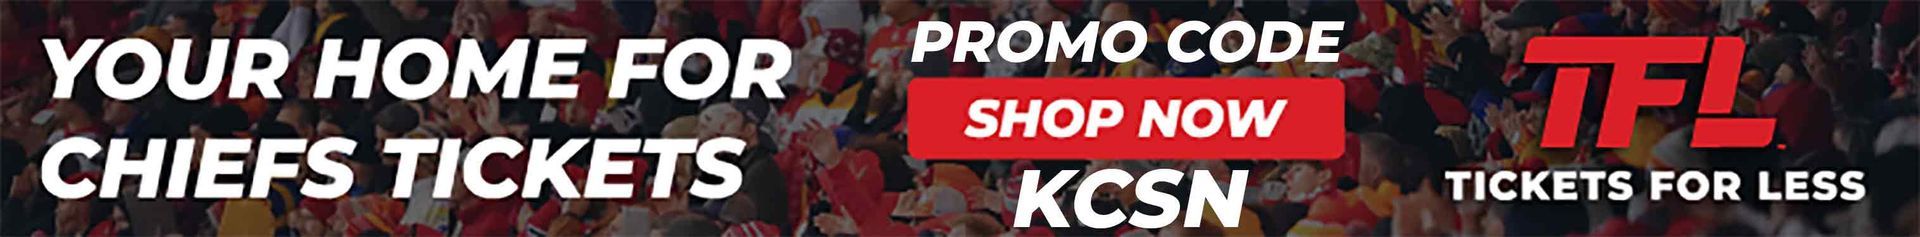 Use promo code KCSN at Tickets For Less, your home for Chiefs tickets